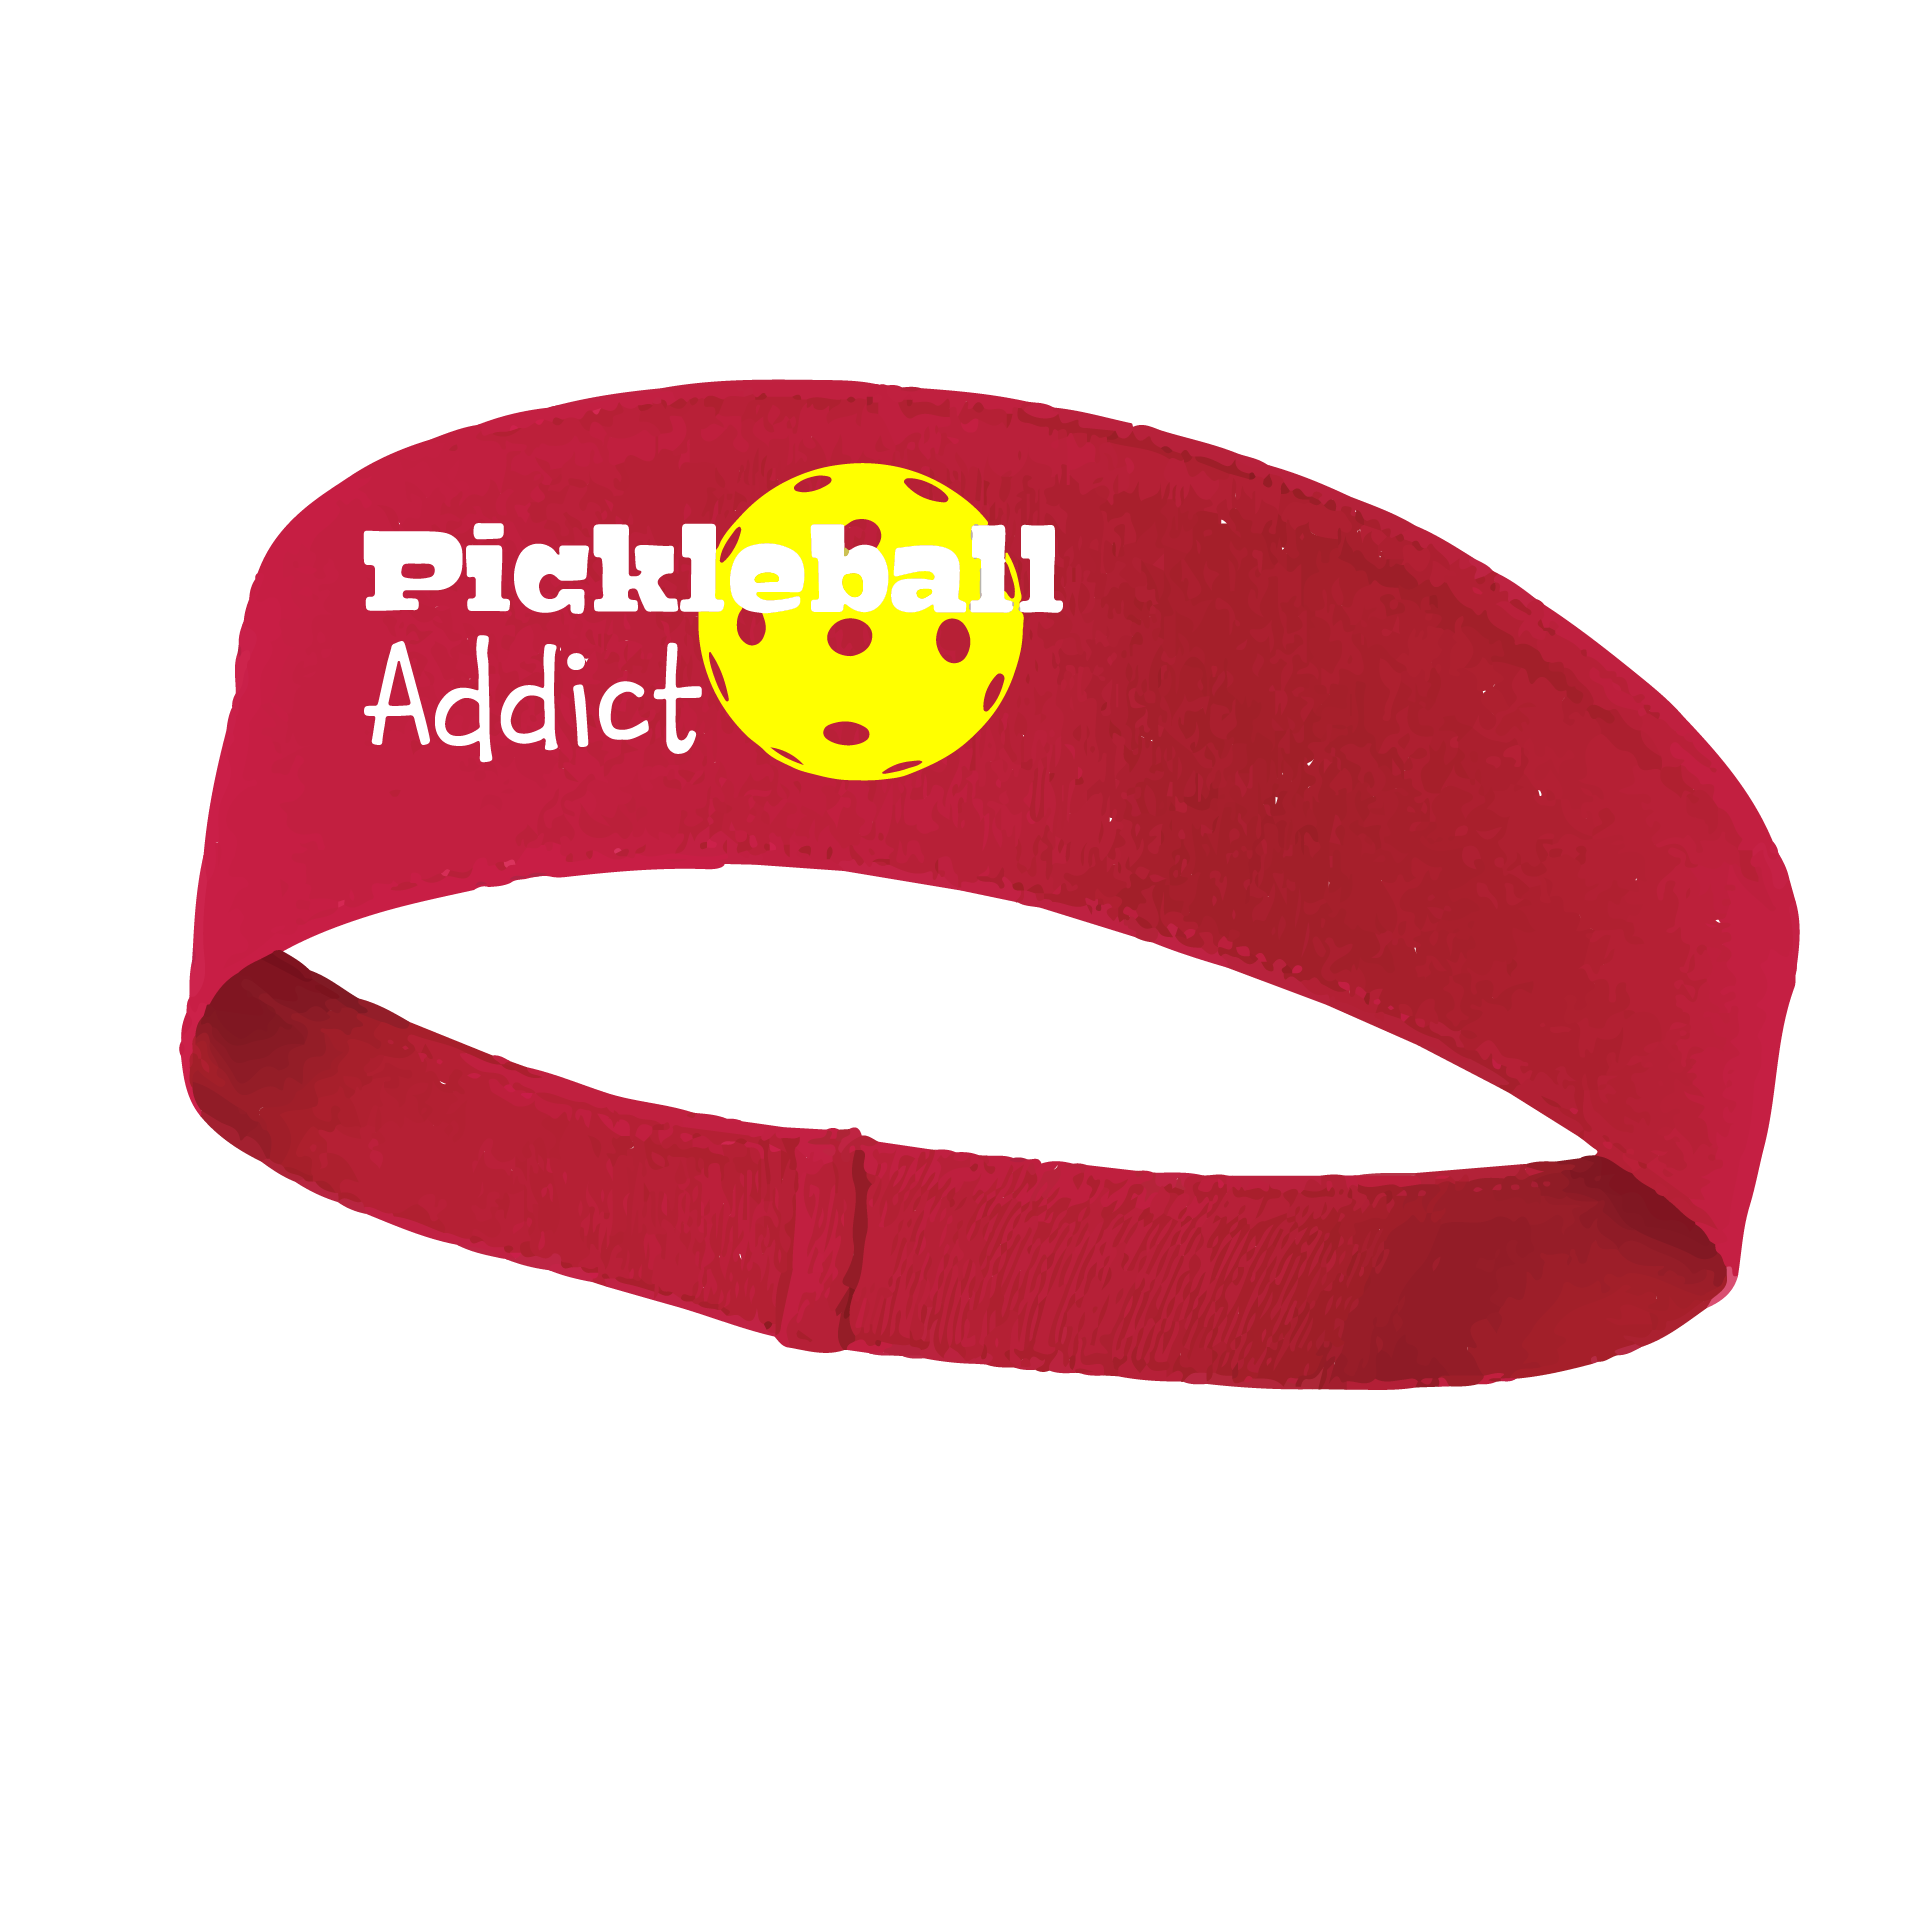 Pickleball Headband Design: Pickleball Addict  This fun, pickleball designed, moisture-wicking headband narrows in the back to fit more securely. Single-needle top-stitched edging. These headbands come in a variety of colors. Truly shows your love for the sport of pickleball!!